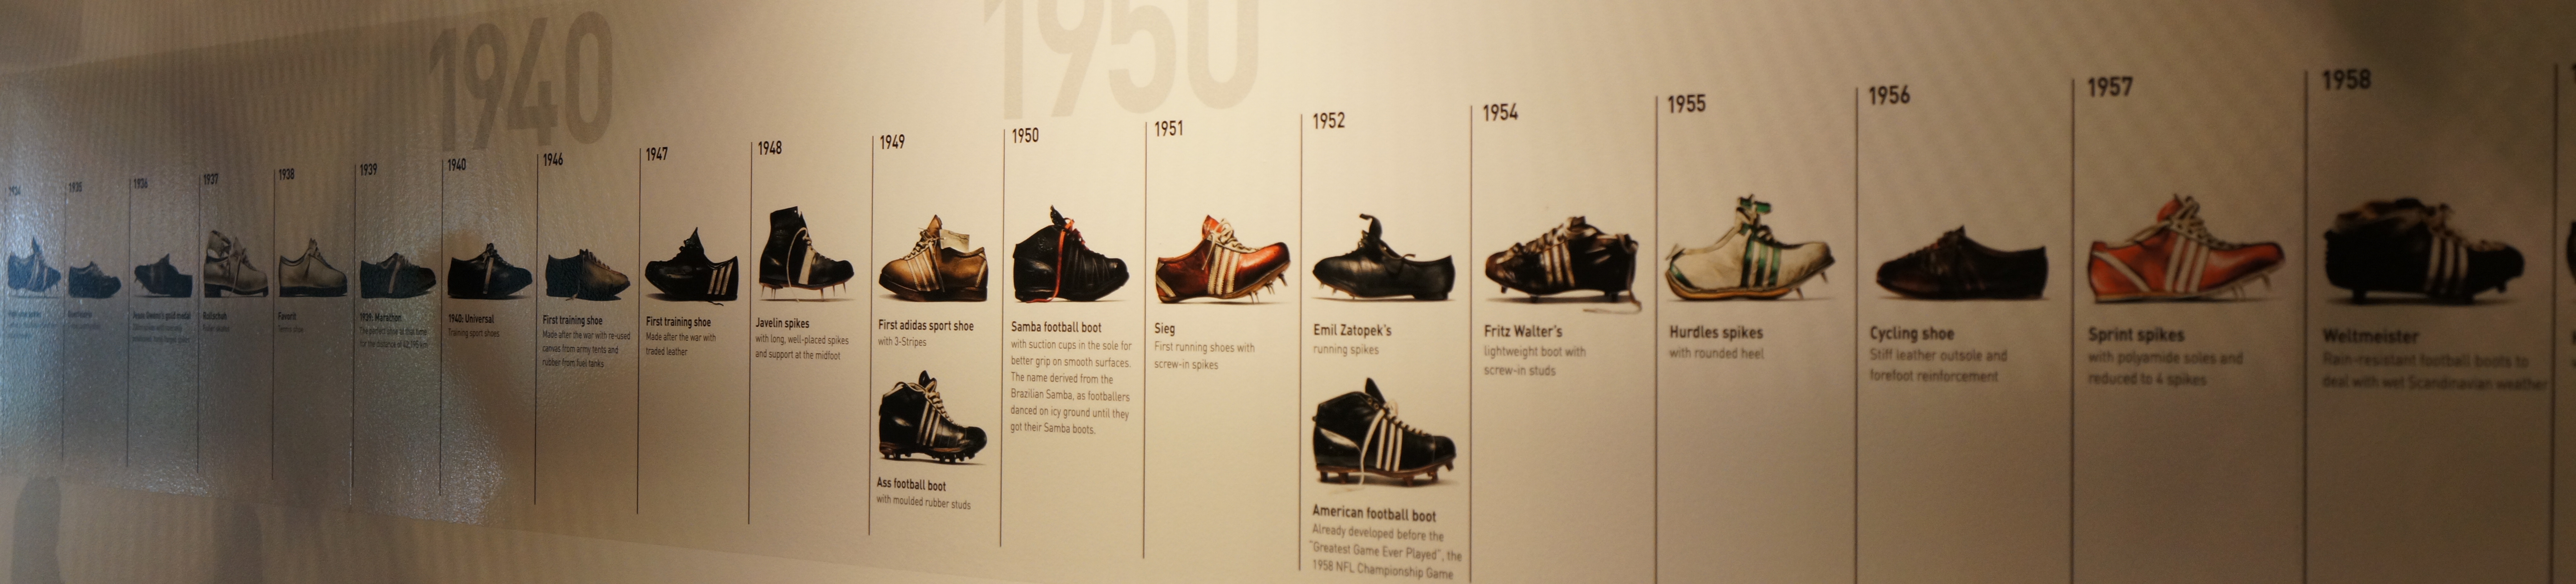 When were shoes first invented?